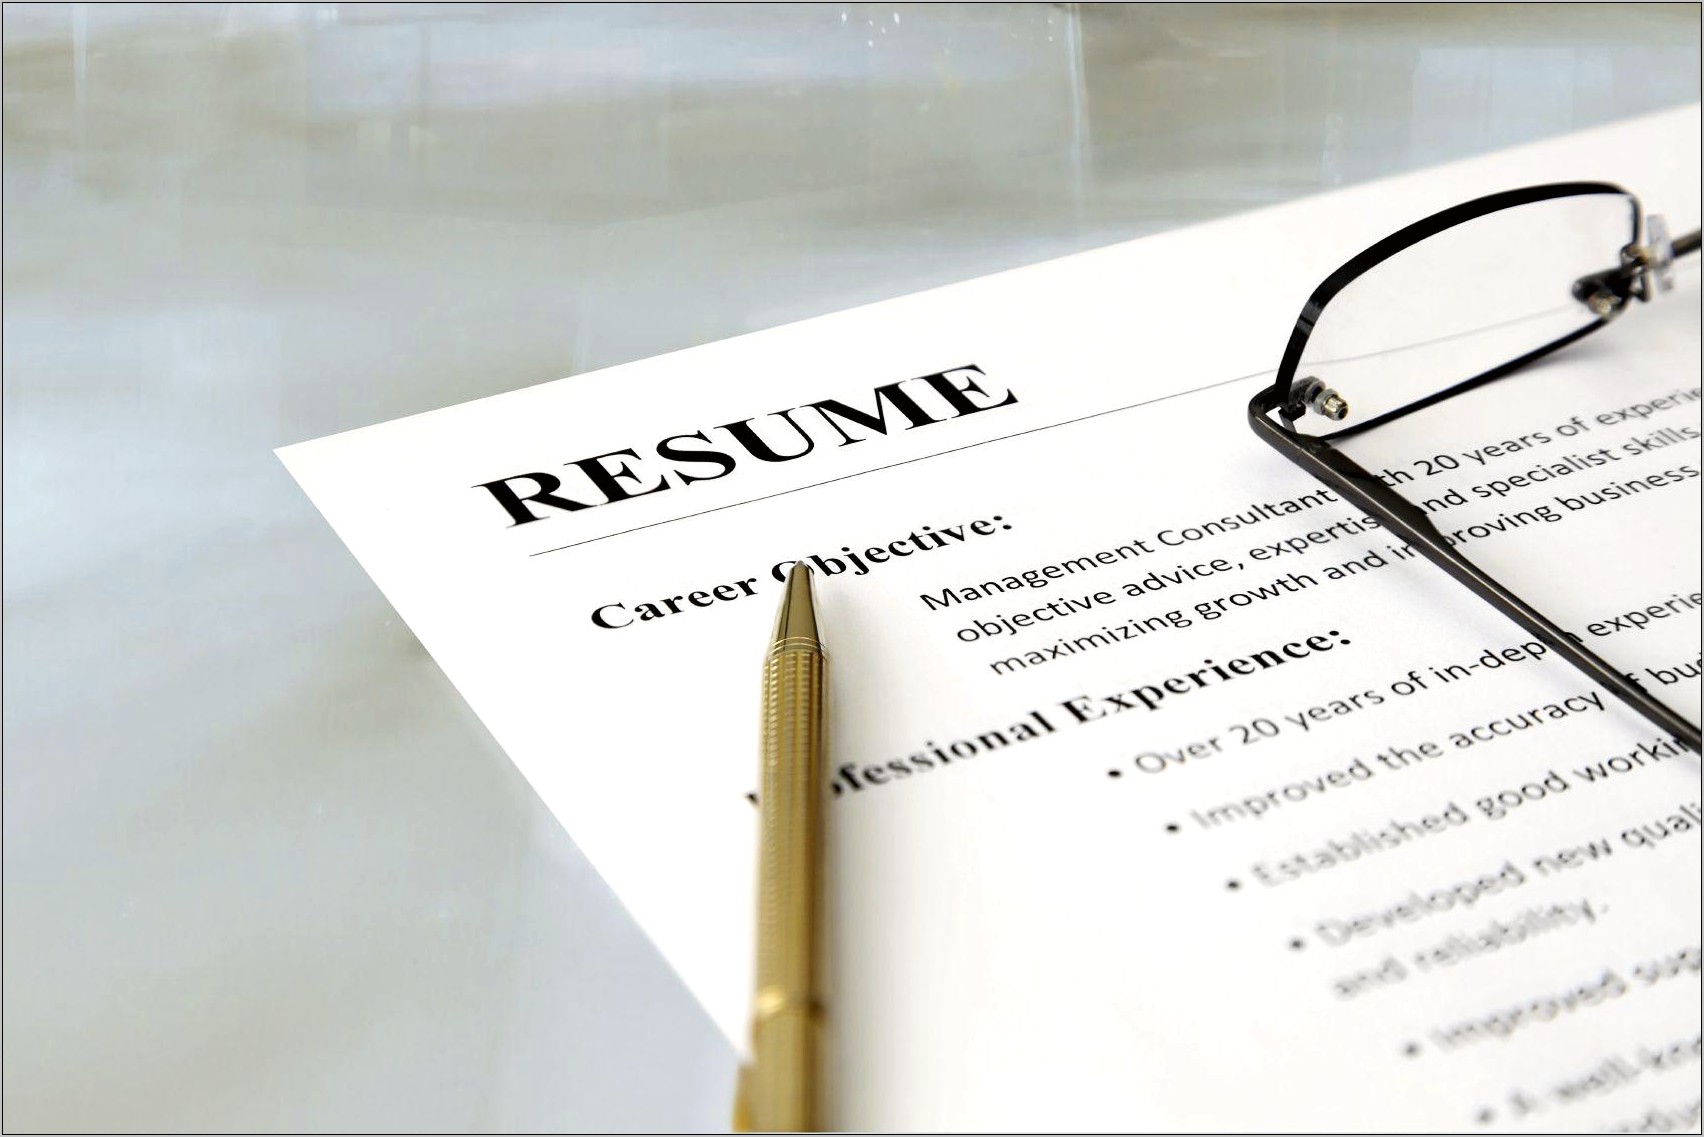 Sample Resume Objective Call Center Agent